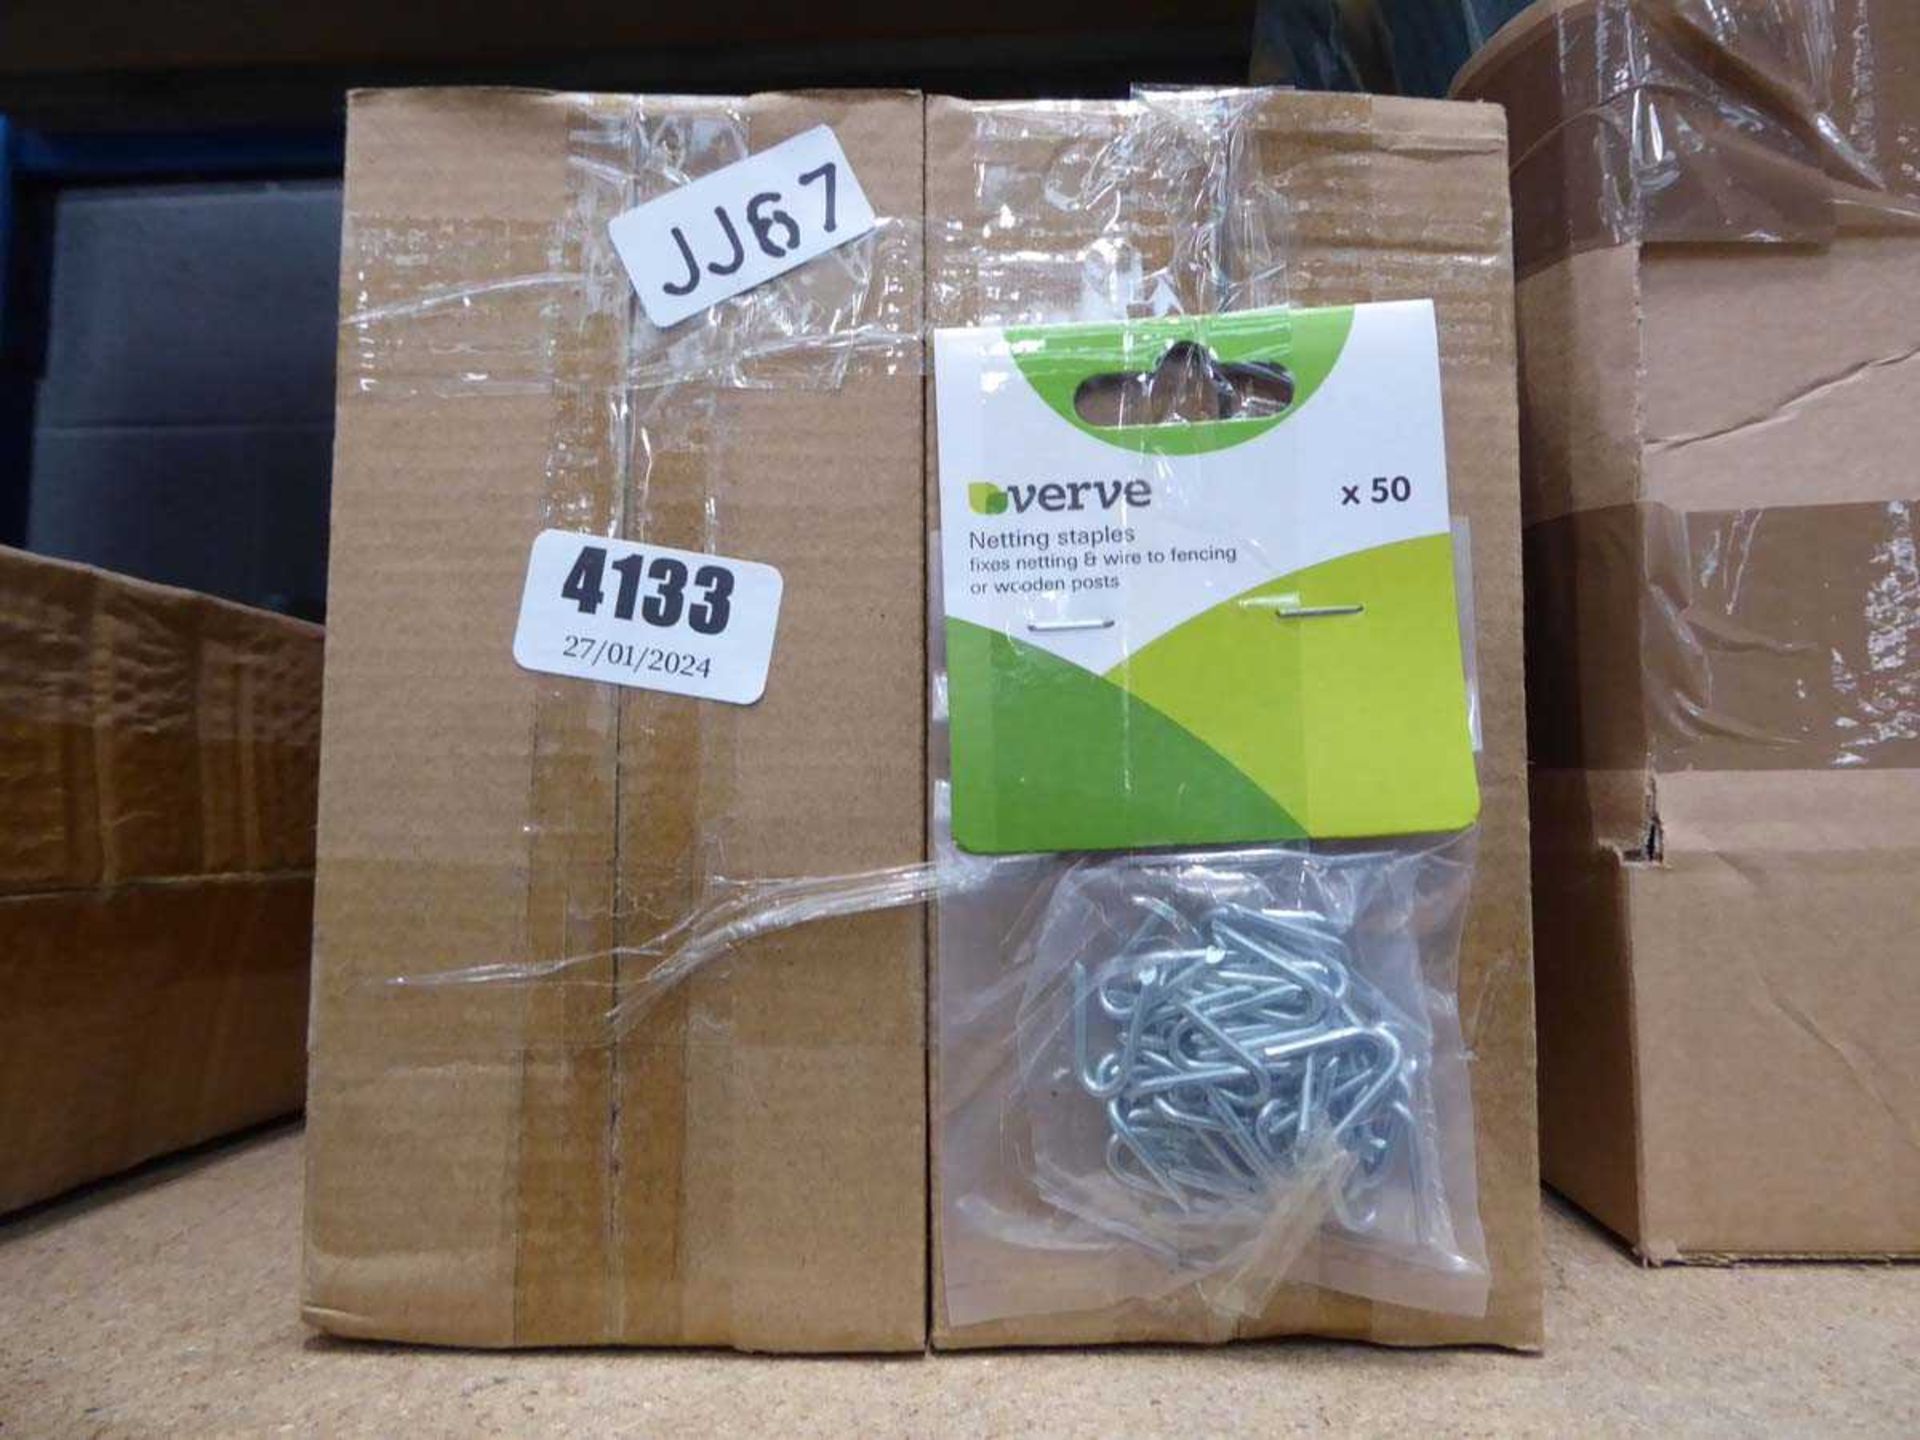 Six small boxes of netting staples